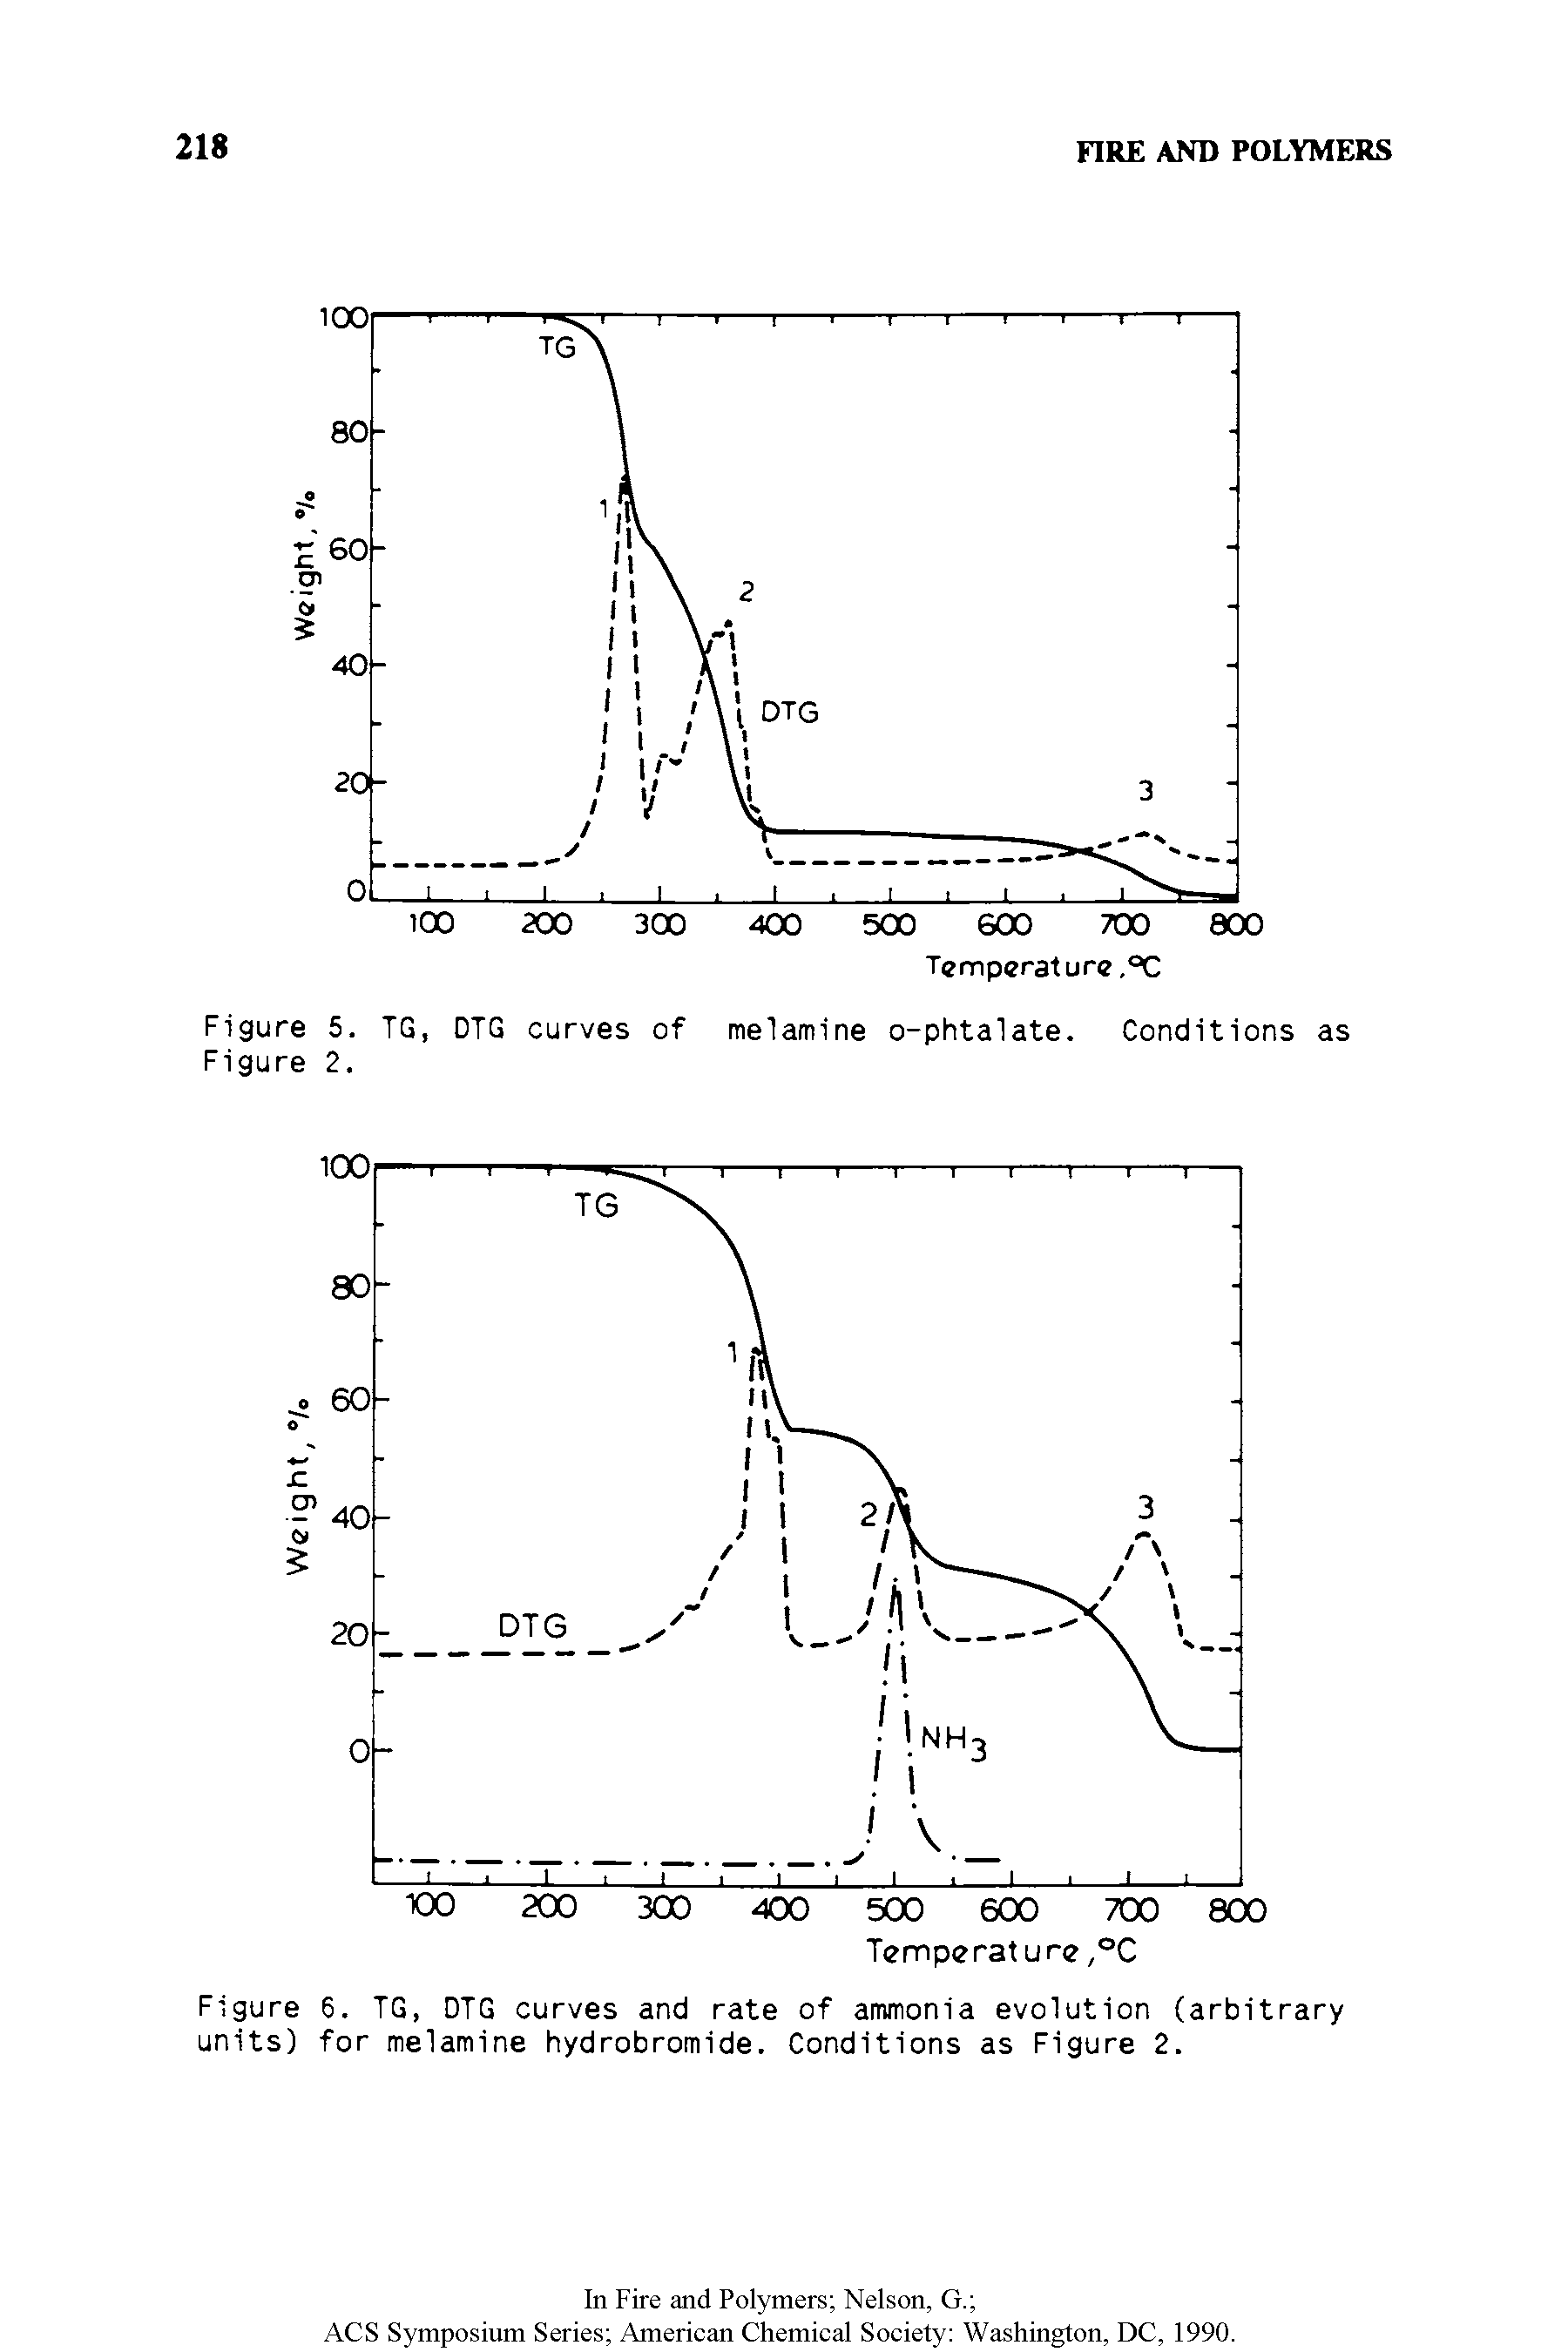 Figure 6. TG, DTG curves and rate of ammonia evolution (arbitrary units) for melamine hydrobromide. Conditions as Figure 2.